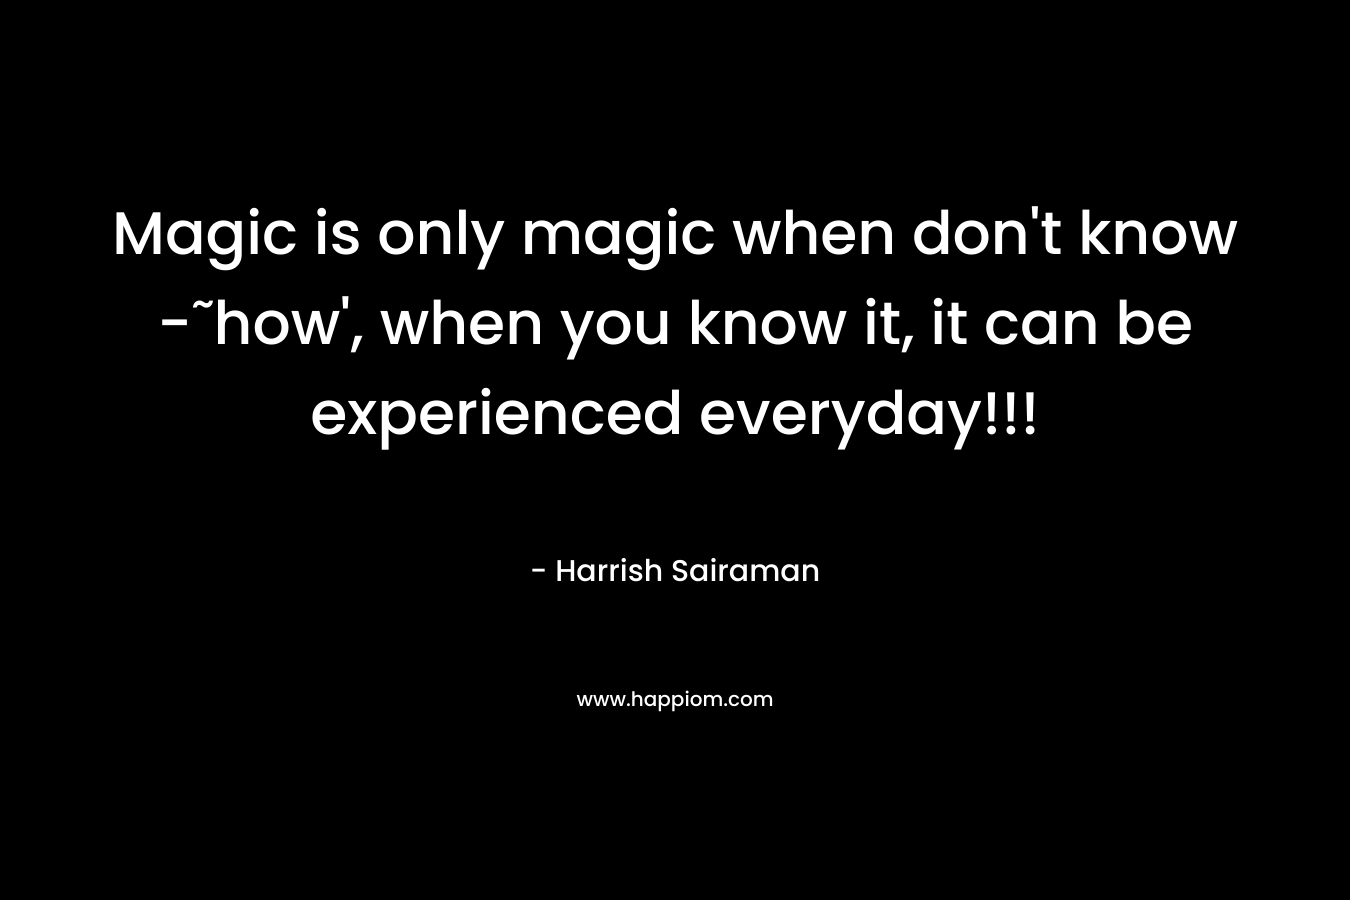 Magic is only magic when don't know -˜how', when you know it, it can be experienced everyday!!!